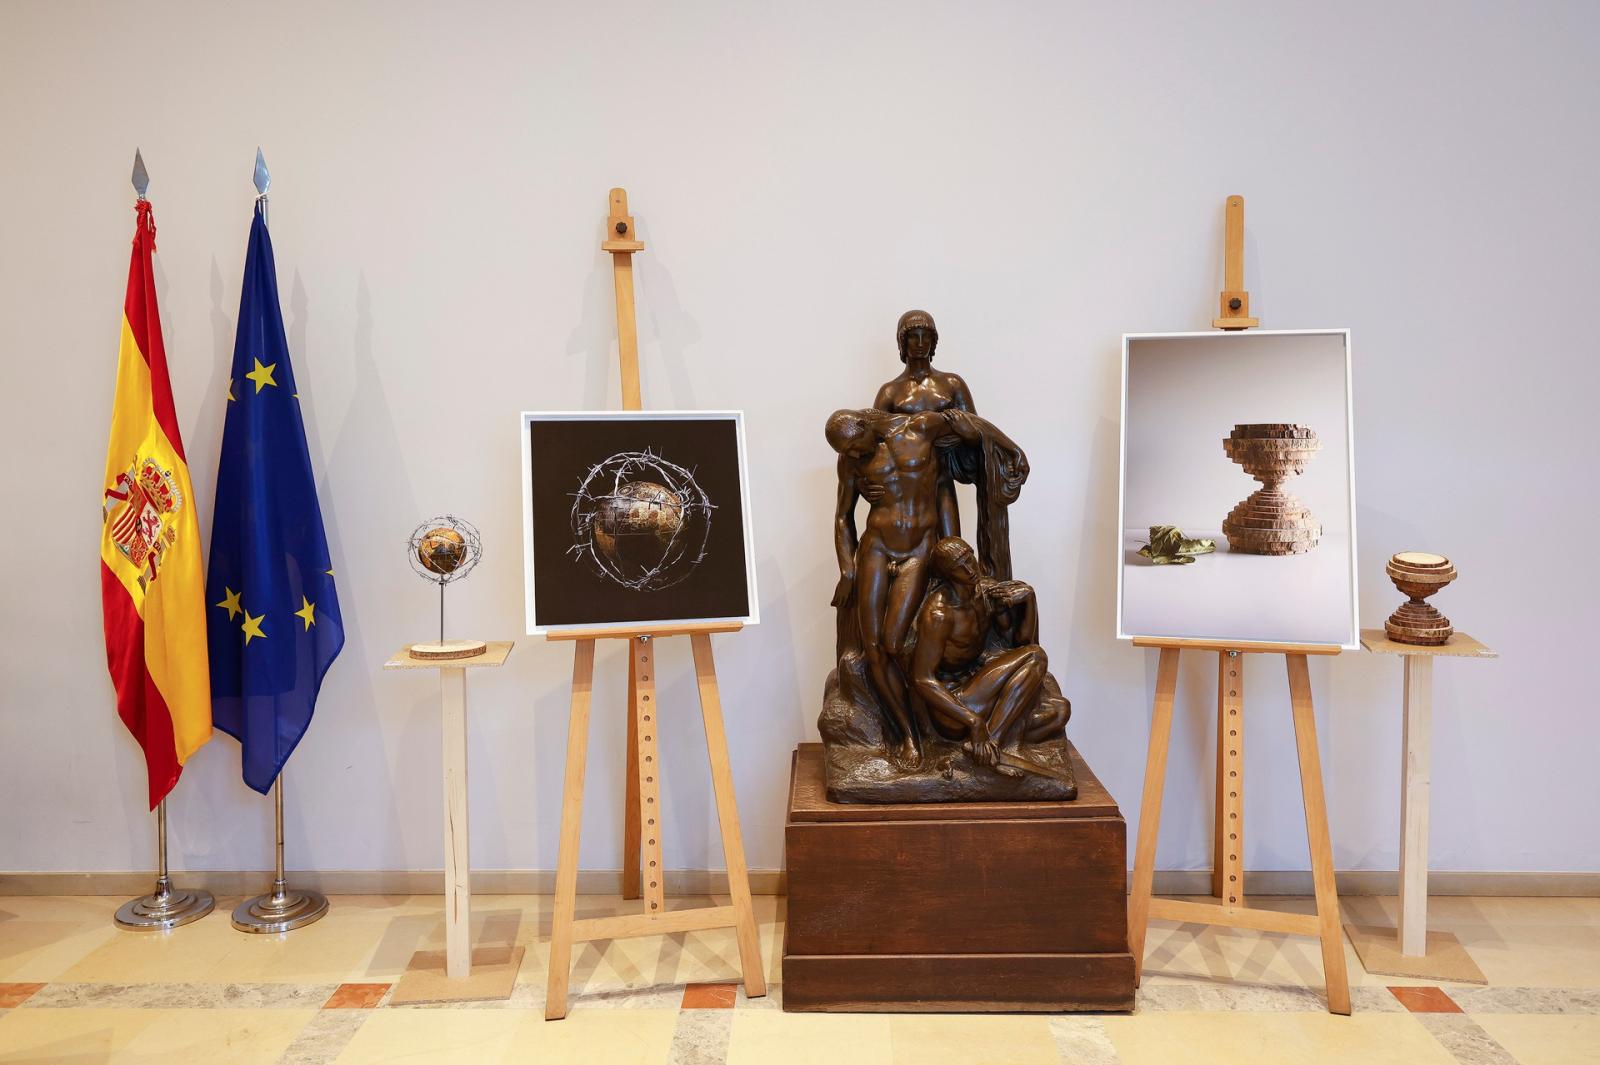 Exhibition at the Spanish embassy in Brussels